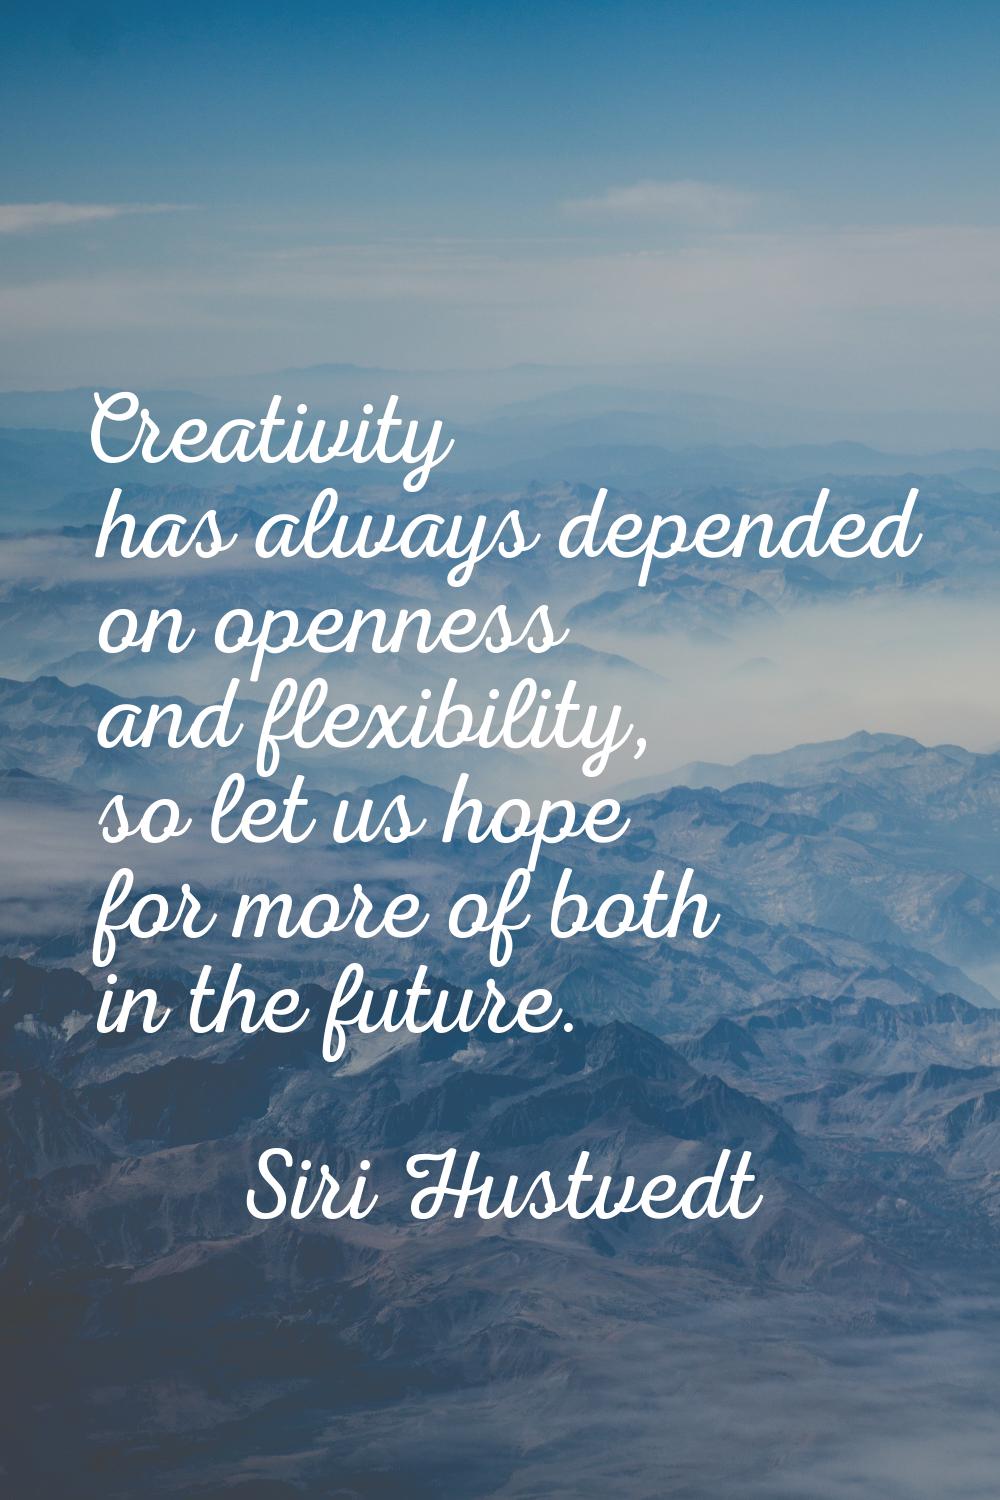 Creativity has always depended on openness and flexibility, so let us hope for more of both in the 